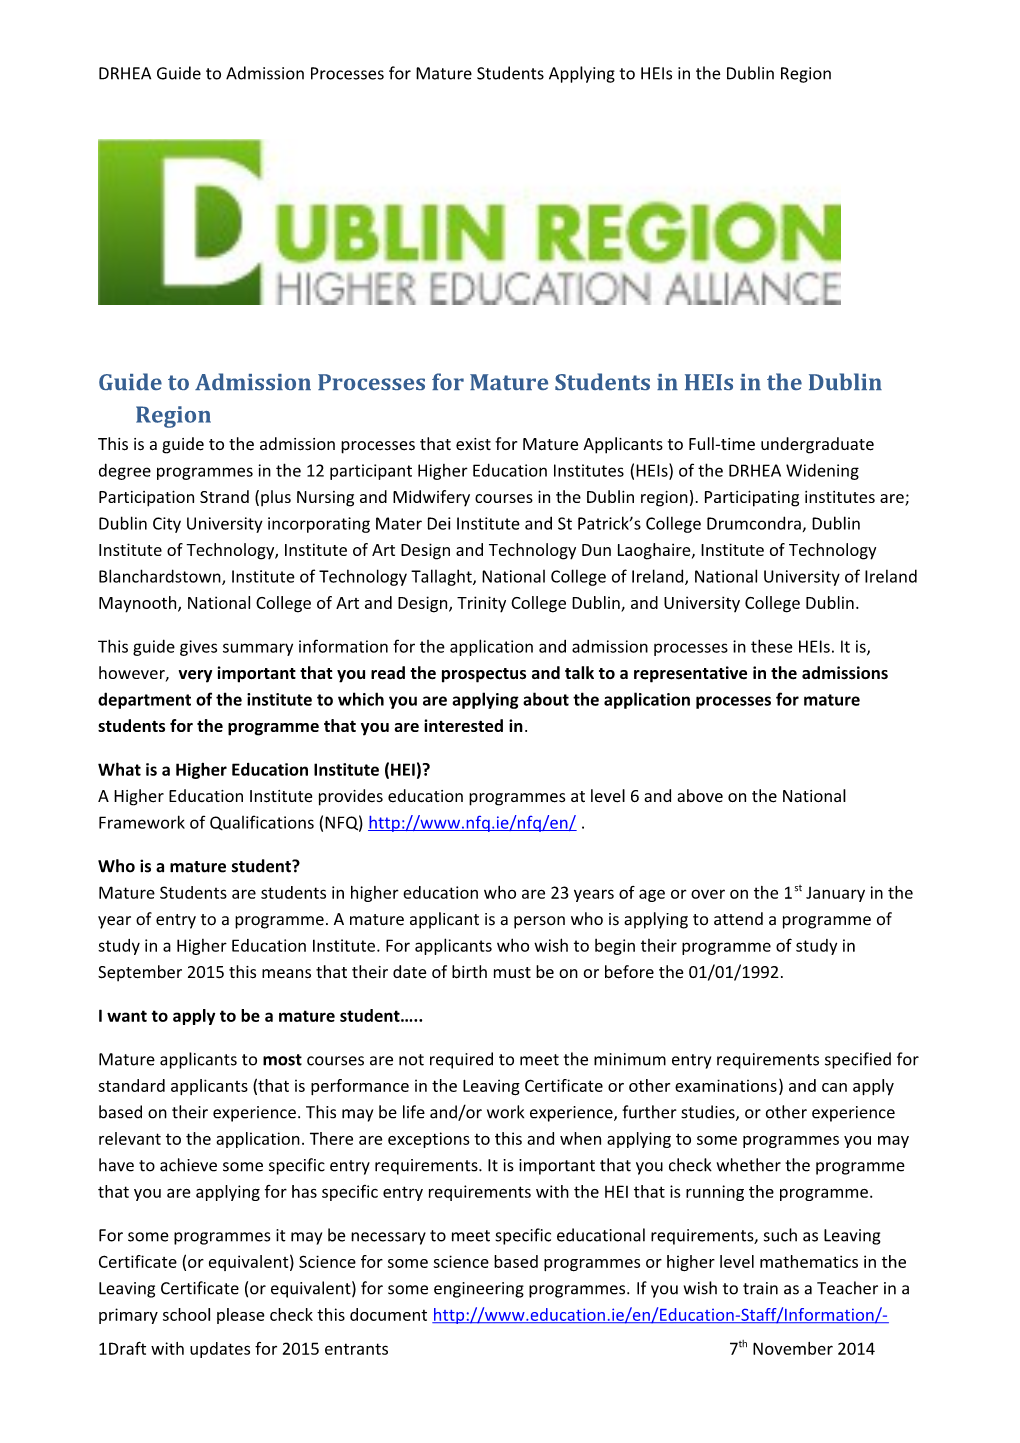 Guide to Admission Processes for Mature Students in Heis in the Dublin Region